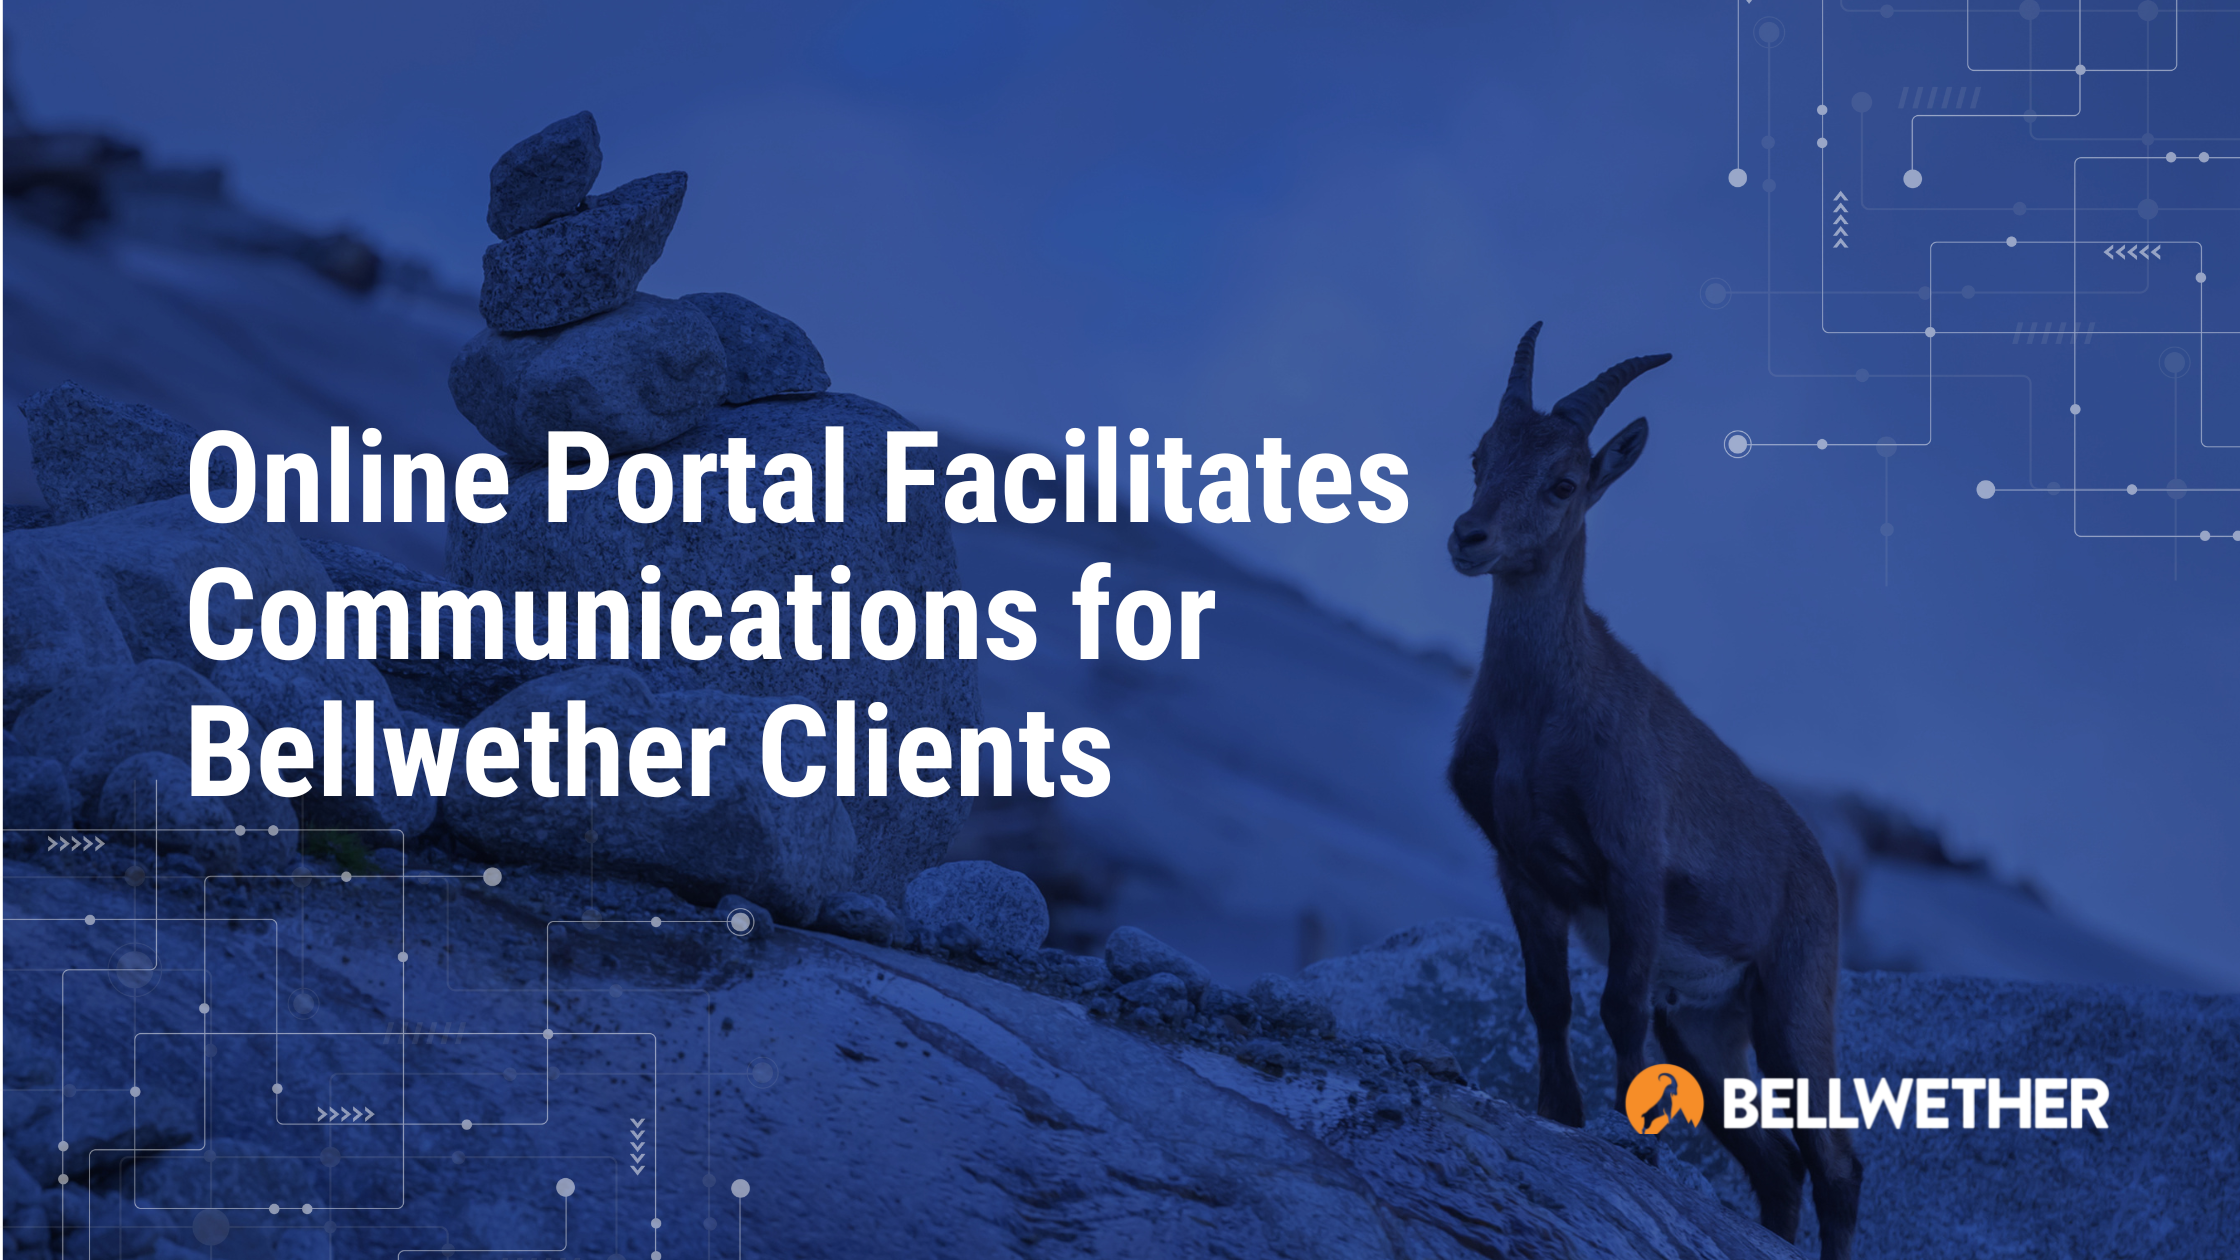 Online Portal Facilitates Communications for Bellwether Clients